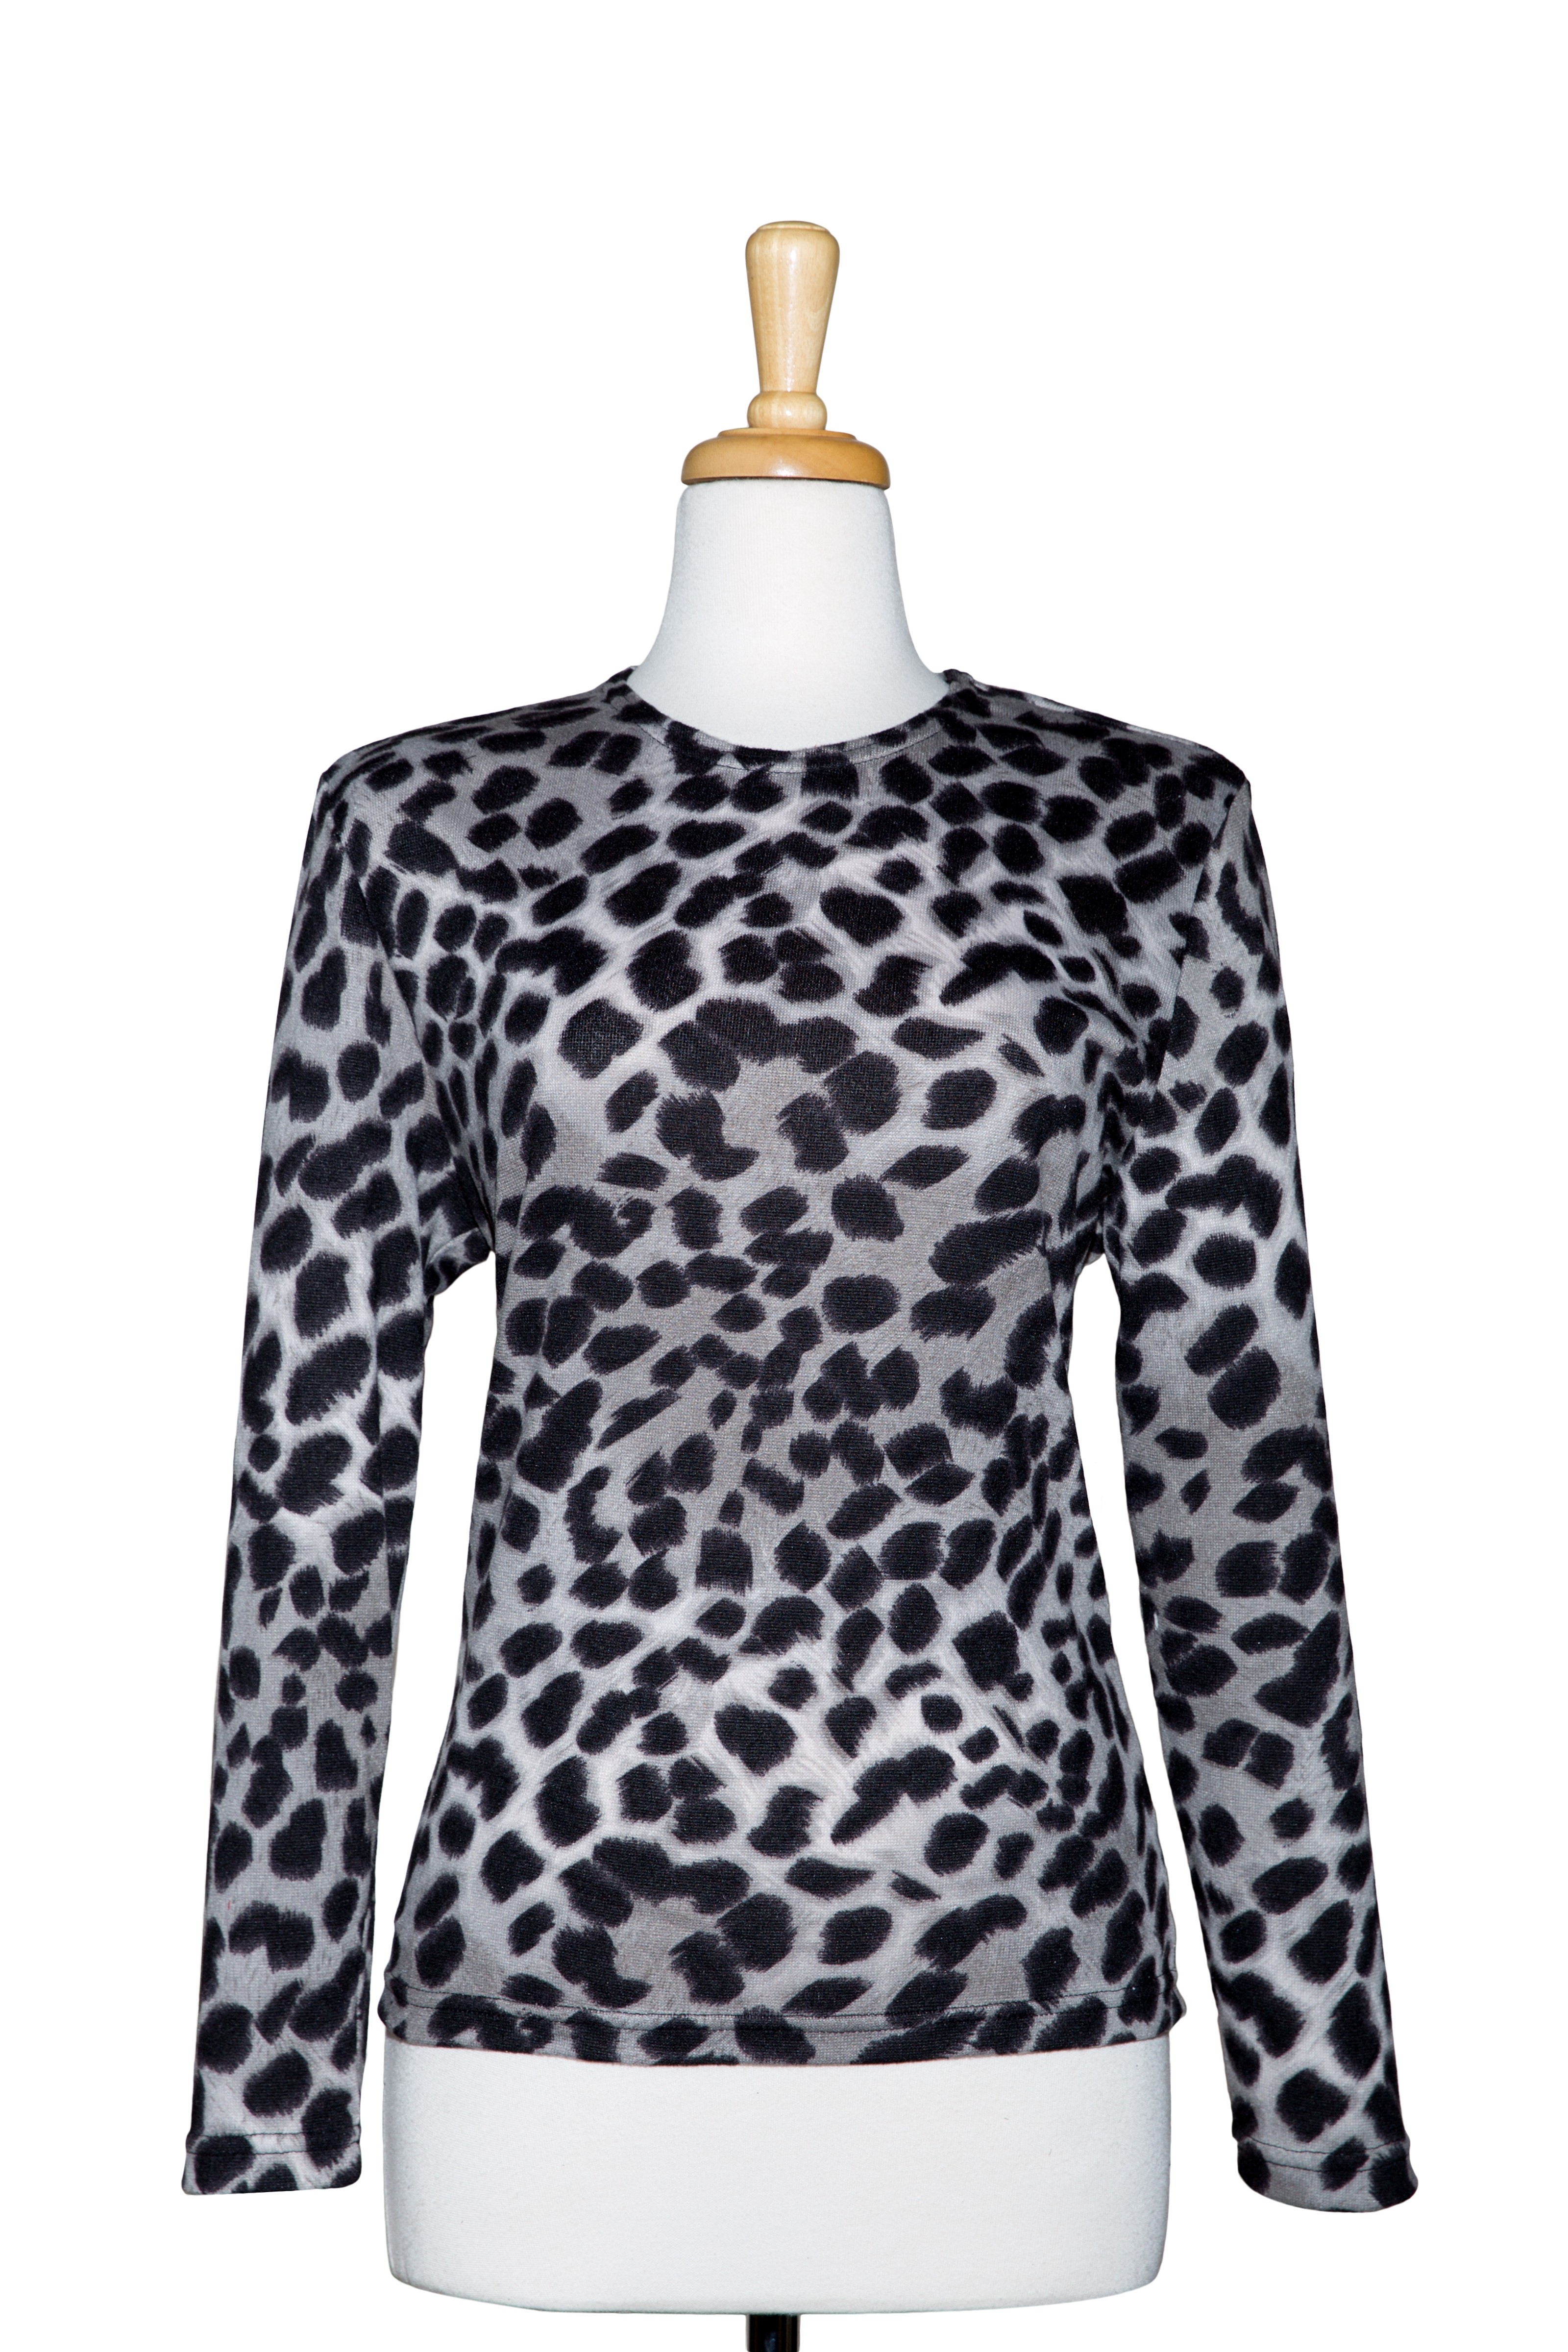 Plus Size Black and Grey Leopard Print Long Sleeve Top 